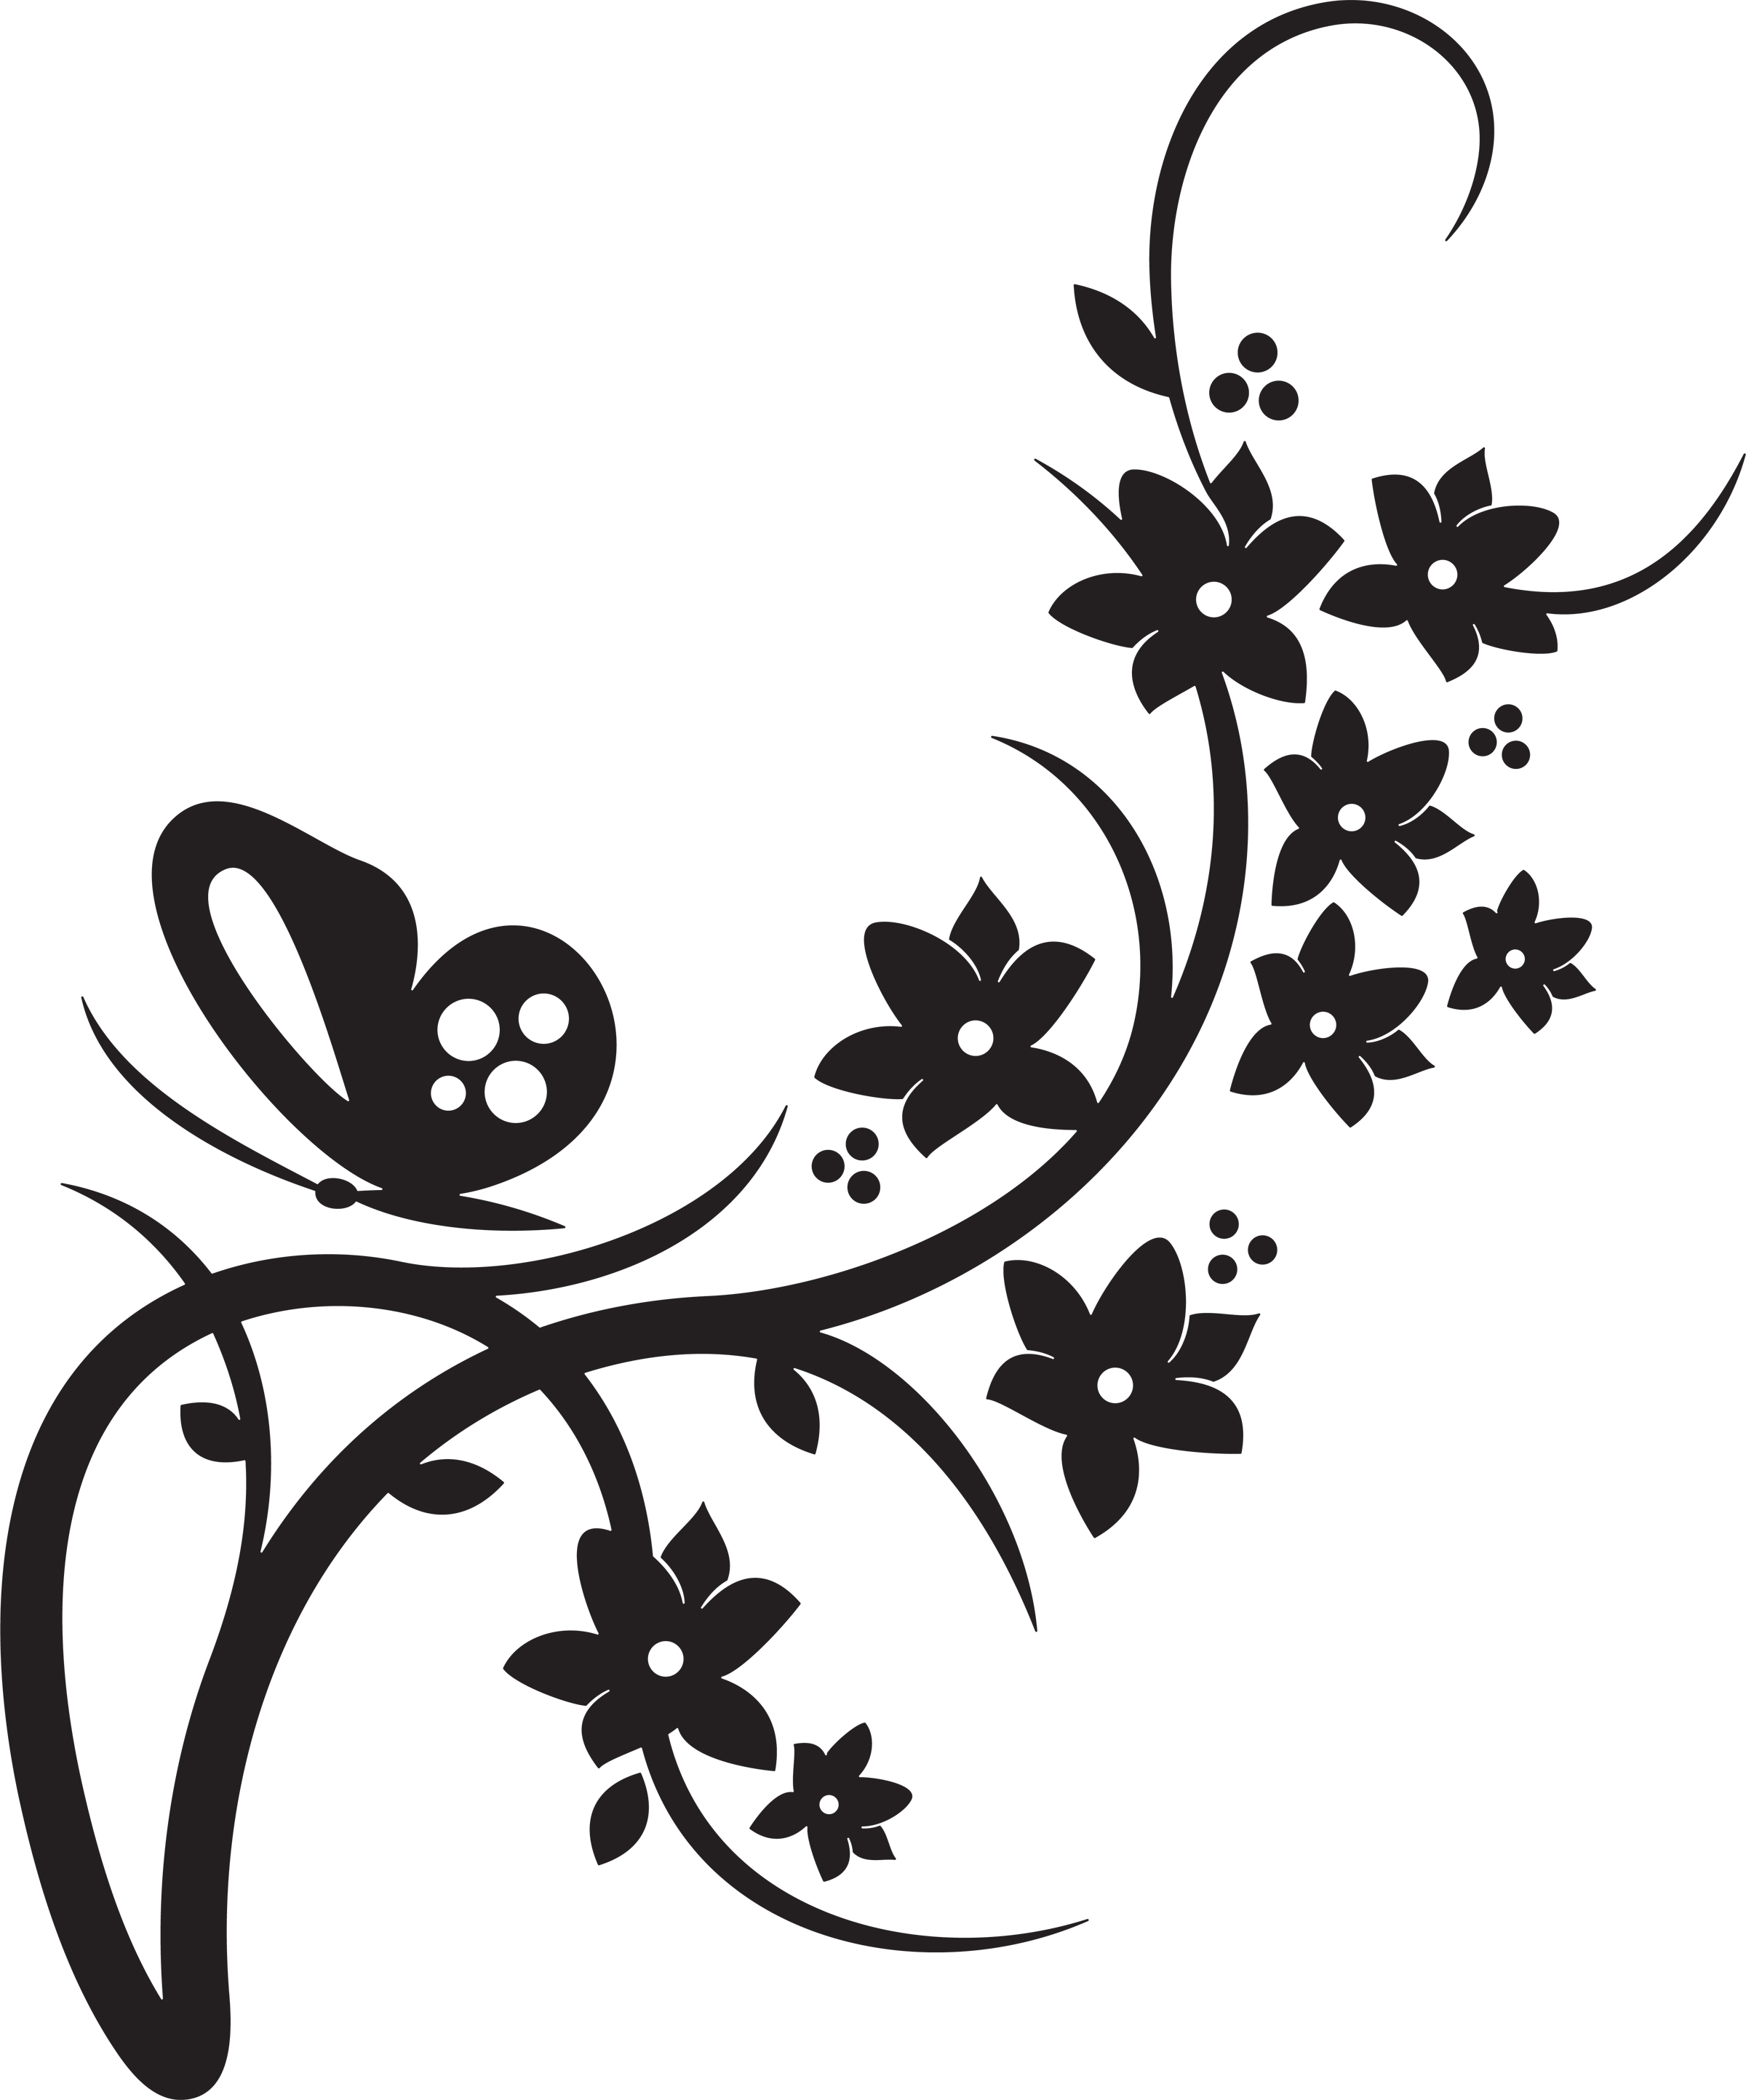 Christian Black And White Wedding Images - ClipArt Best